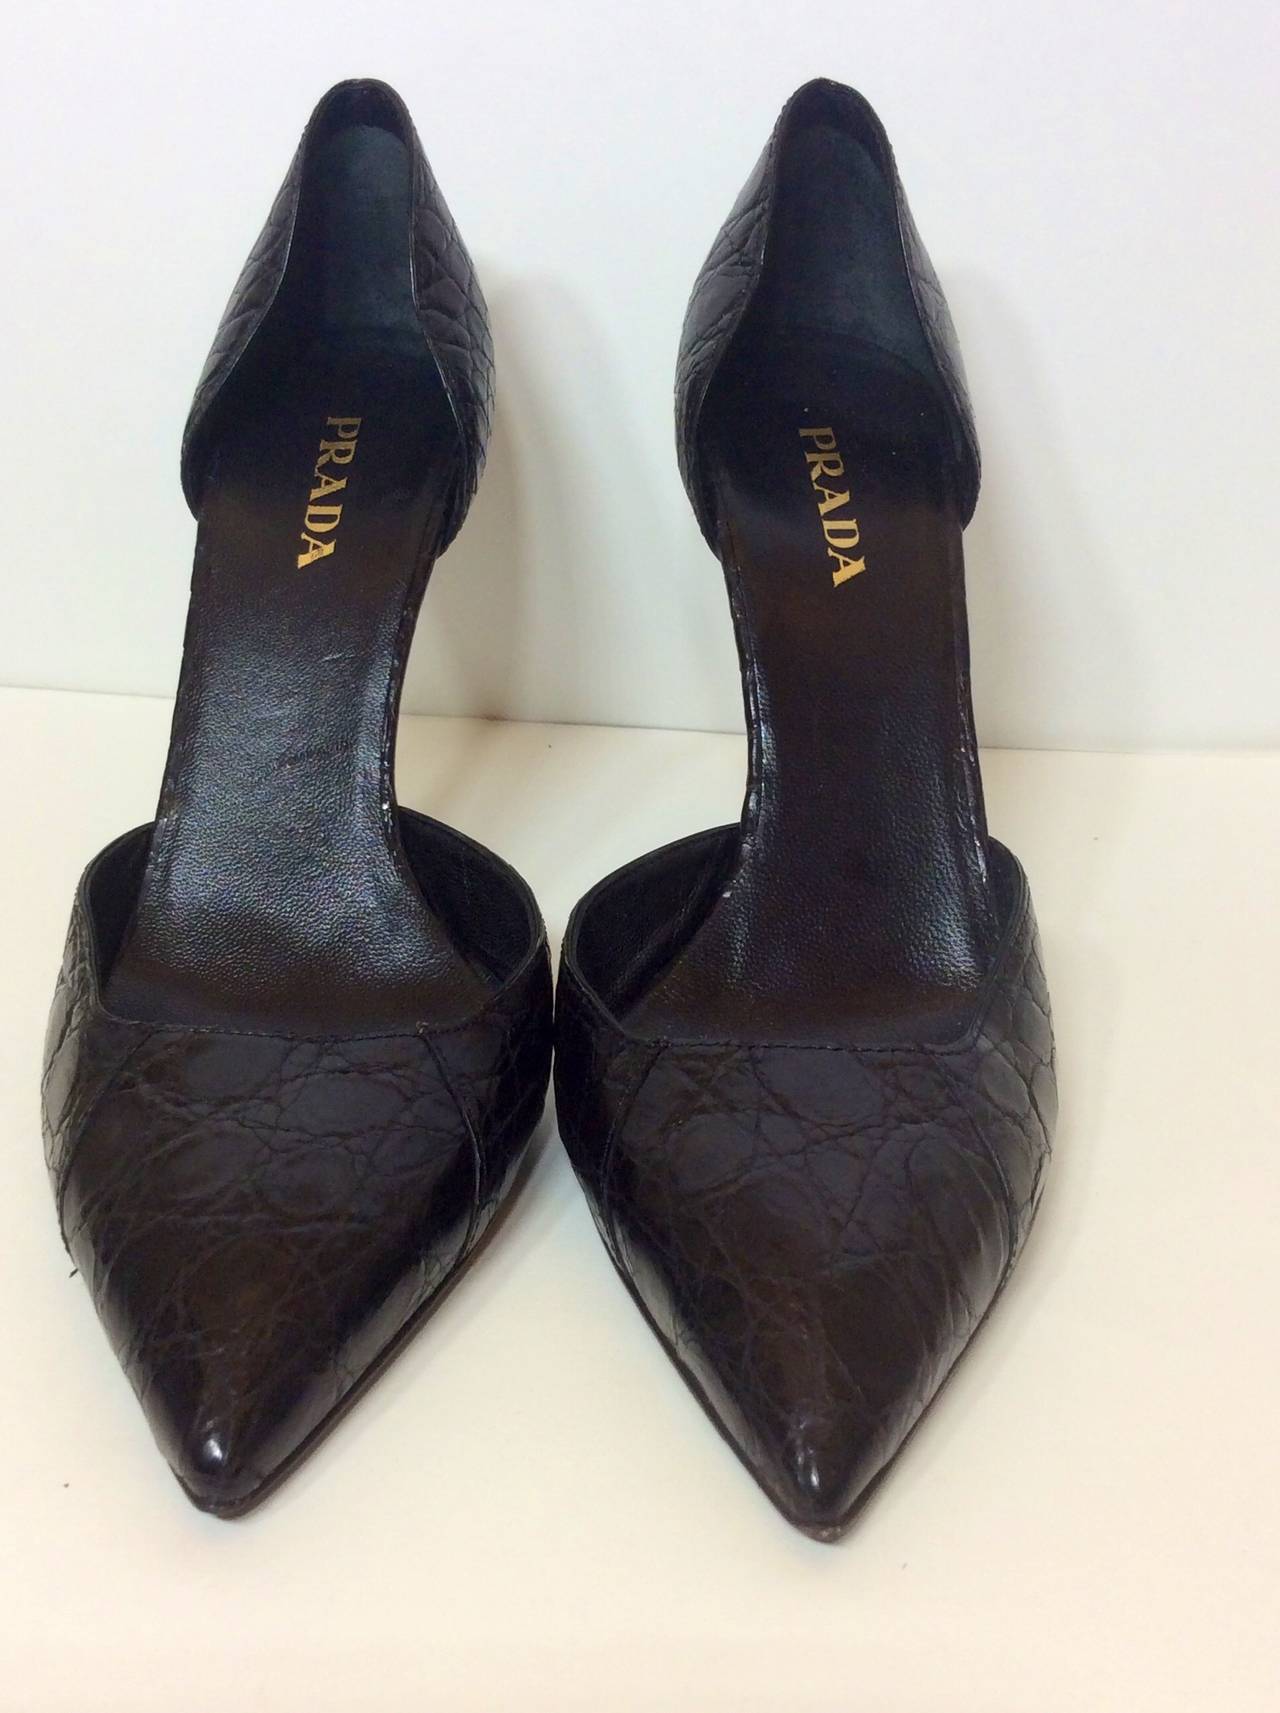 These are a gorgeous pair of Prada crocodile slip on pointy pump
Size 40 1/2
Made In Italy